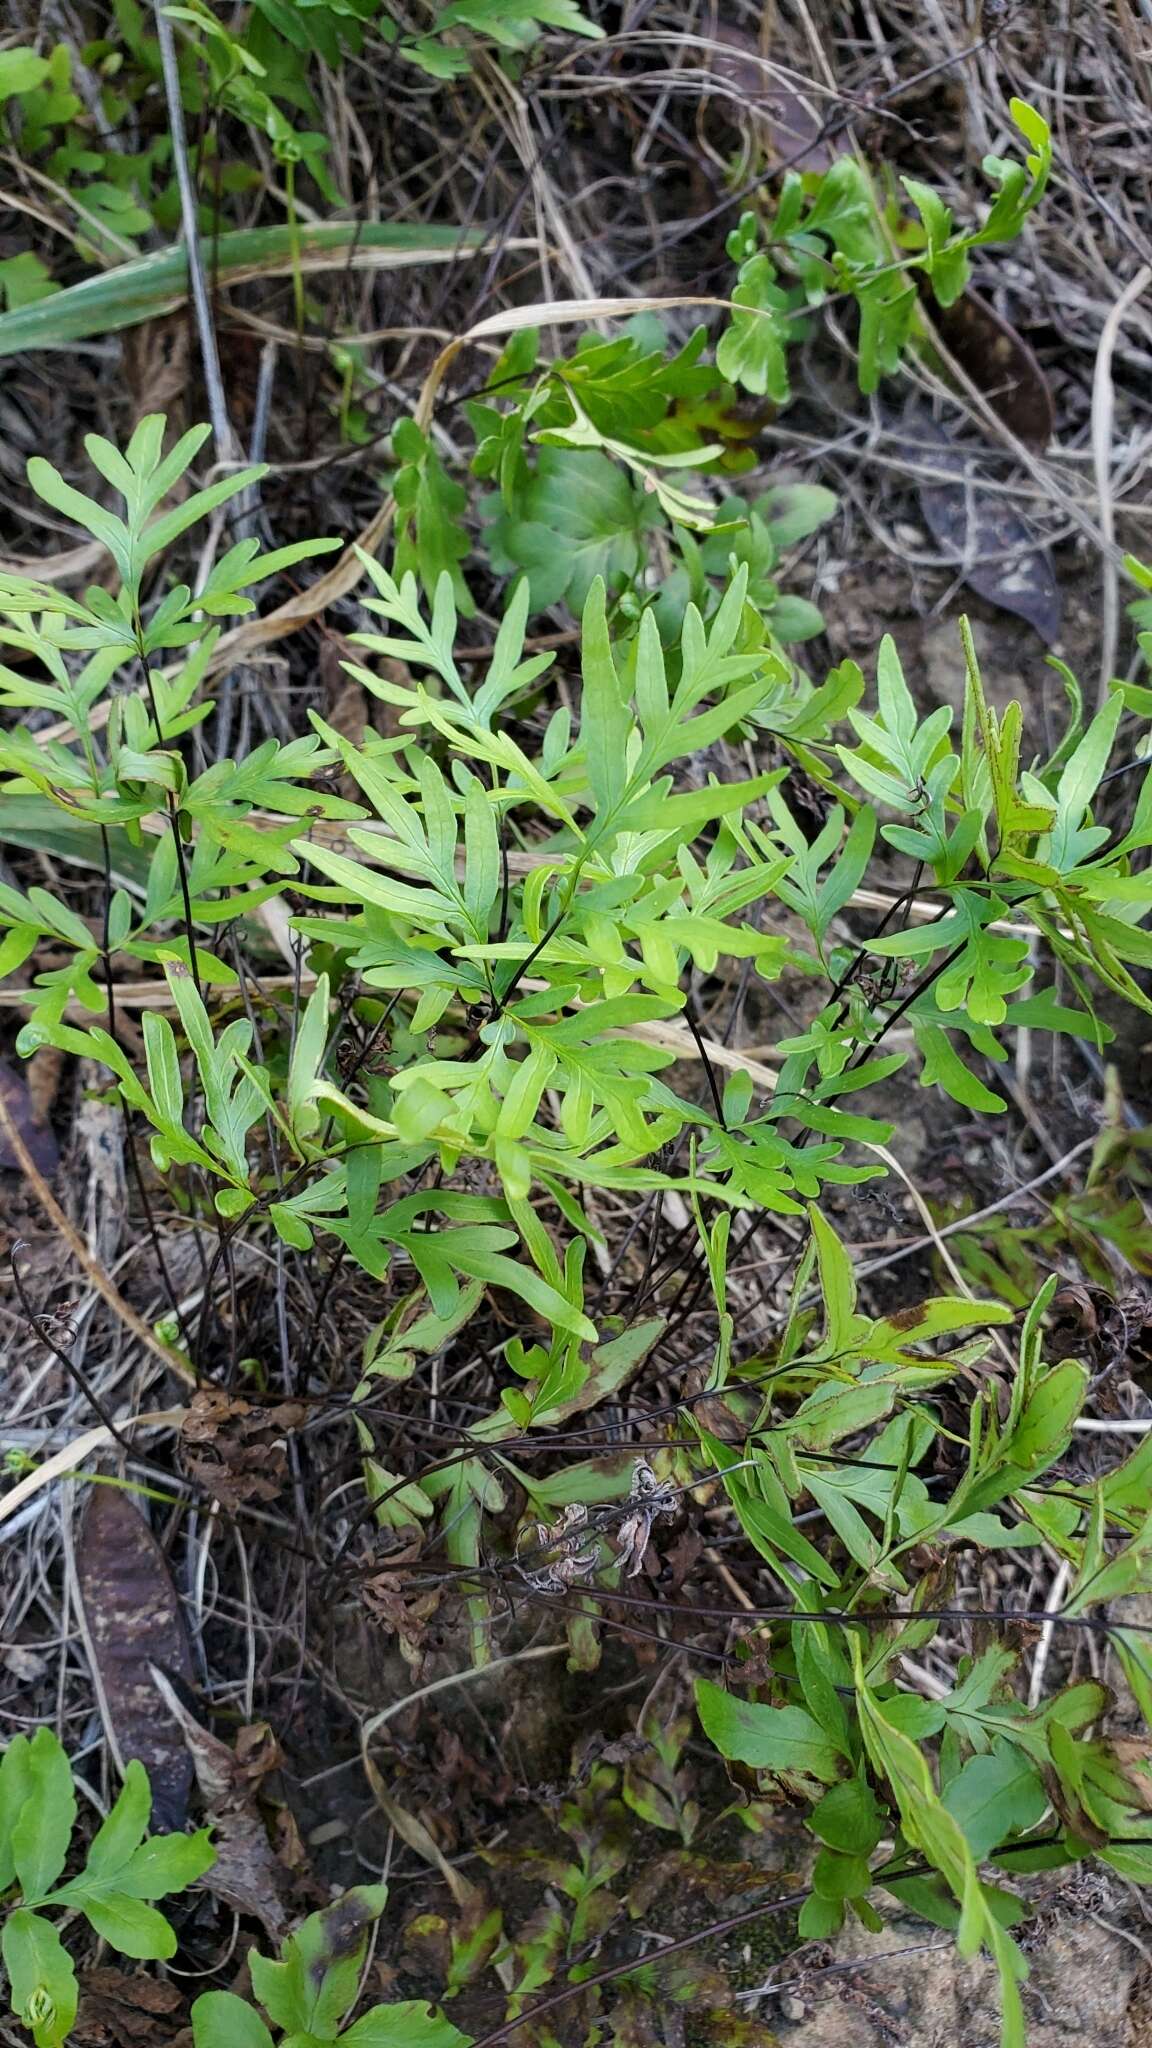 Image of Takeuch's lipfern